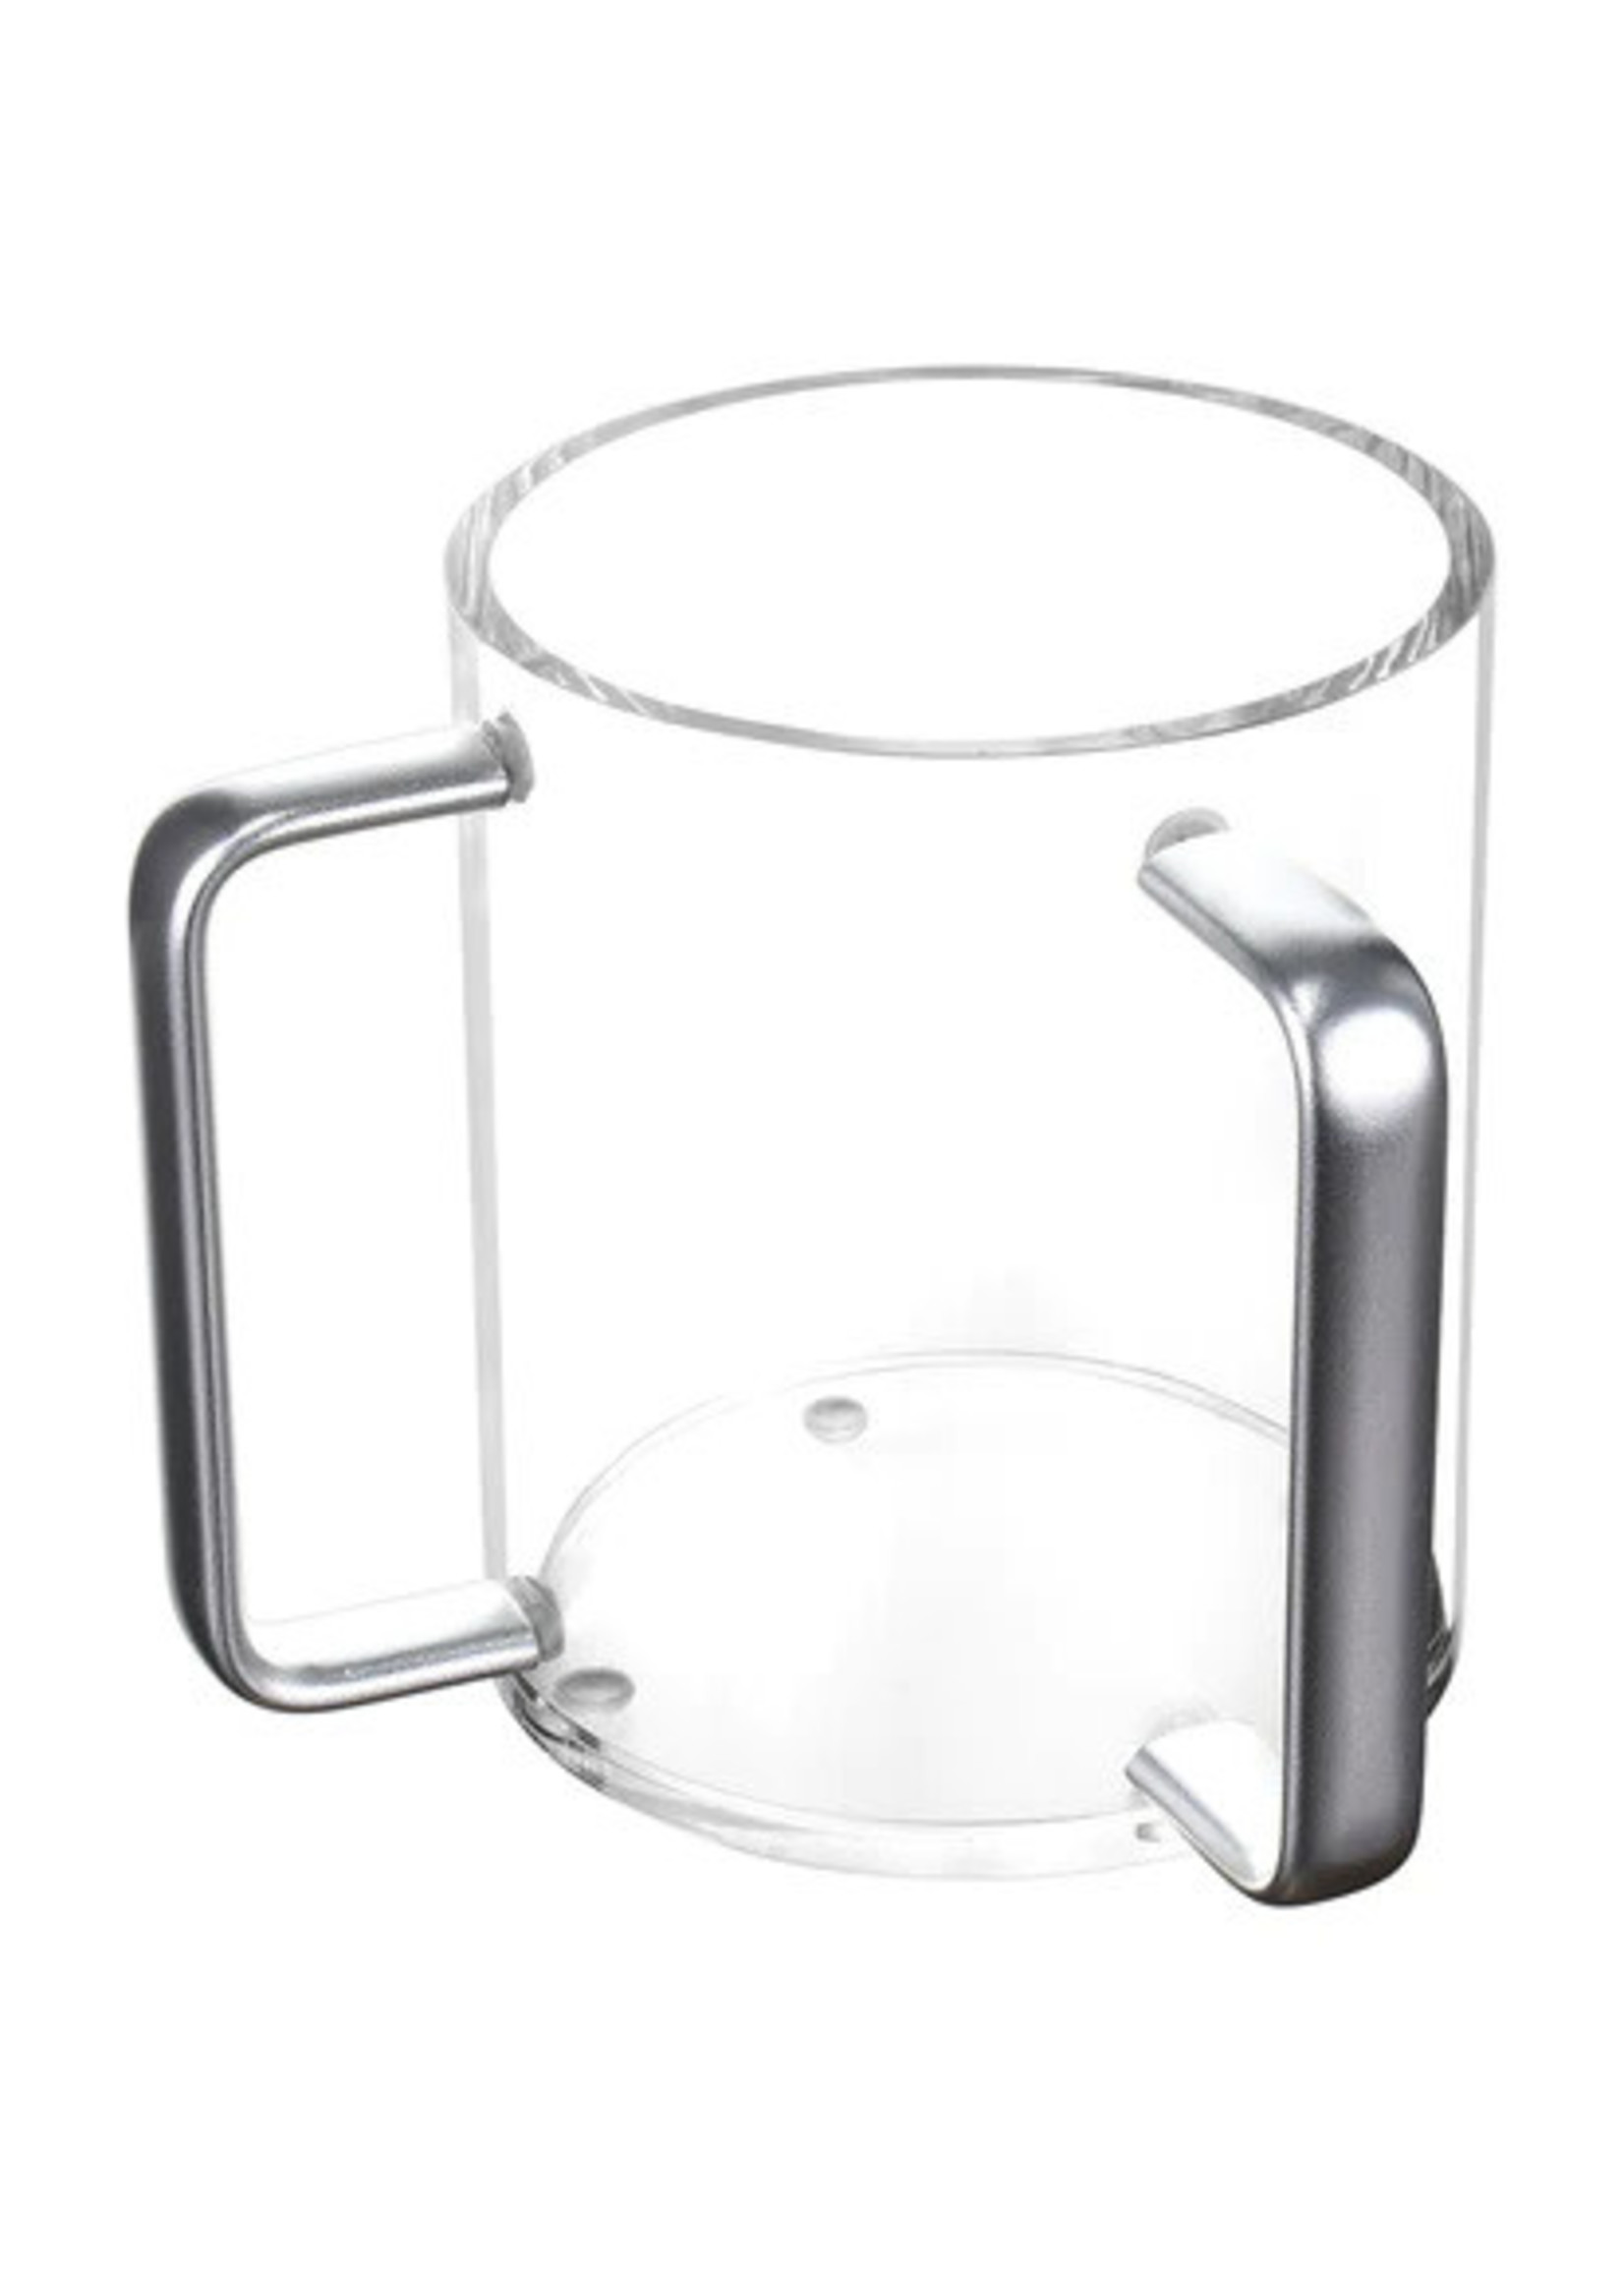 WASHING CUP LUCITE CLEAR W SILVER HANDLES